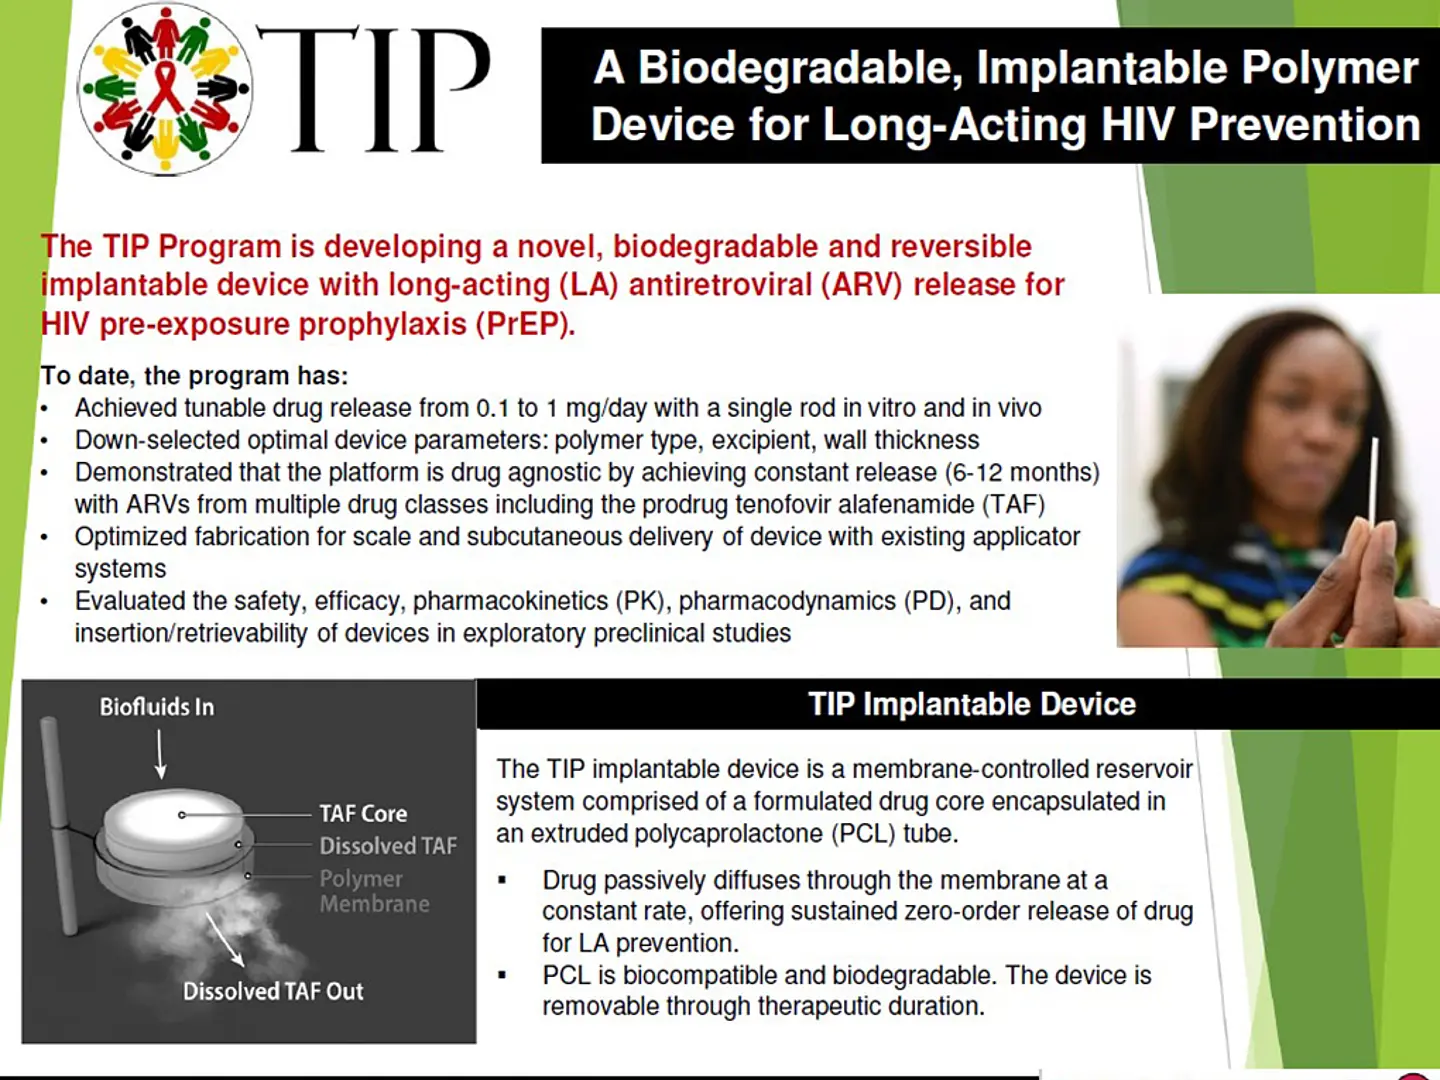 Cover of a study brief on the TIP program to develop implantable antiretroviral drugs.